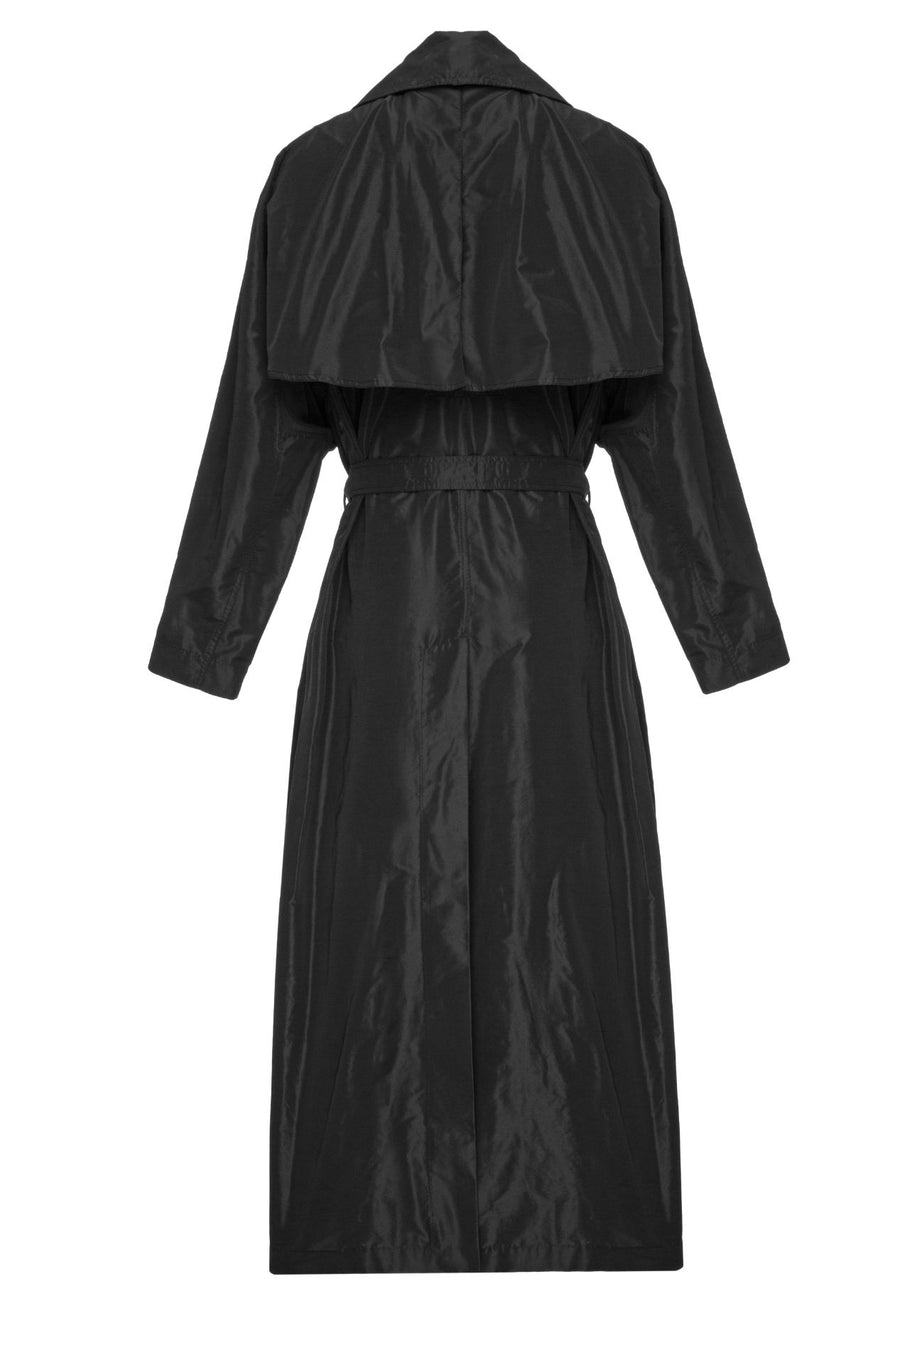 Nasta Black Double-Breasted Trench Coat